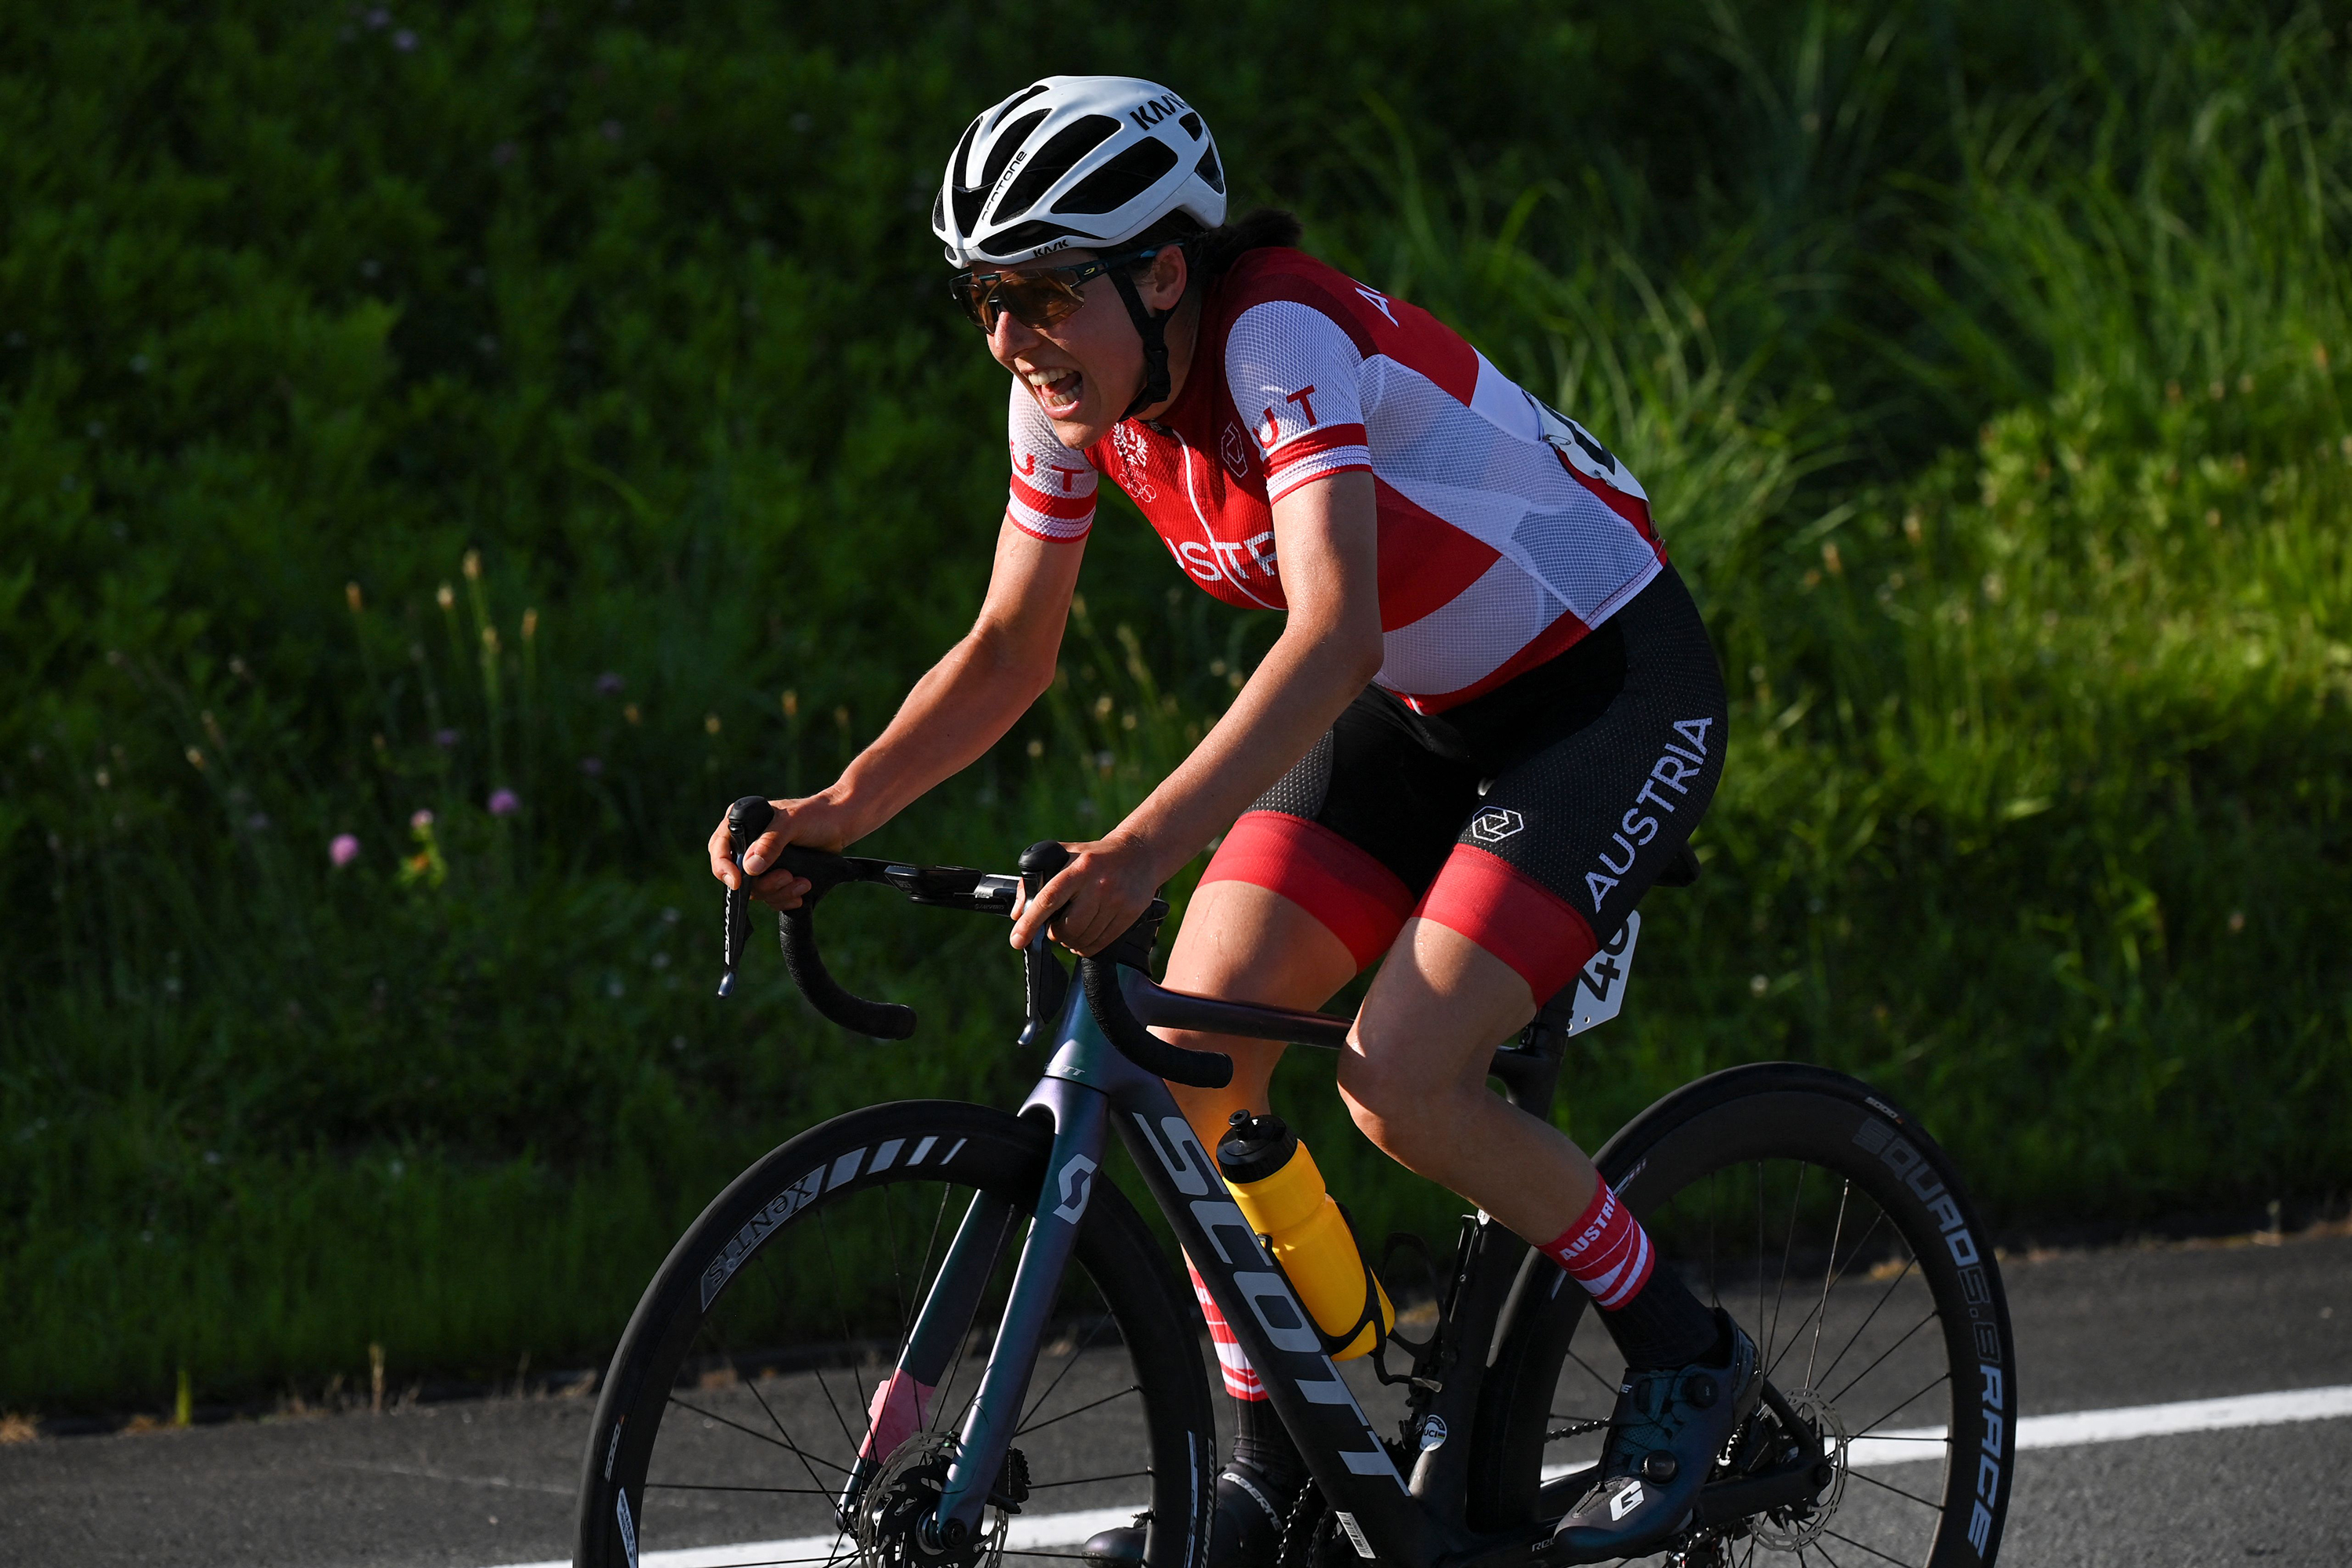 Austria's Anna Kiesenhofer competes in the women's road race on Sunday, July 25.